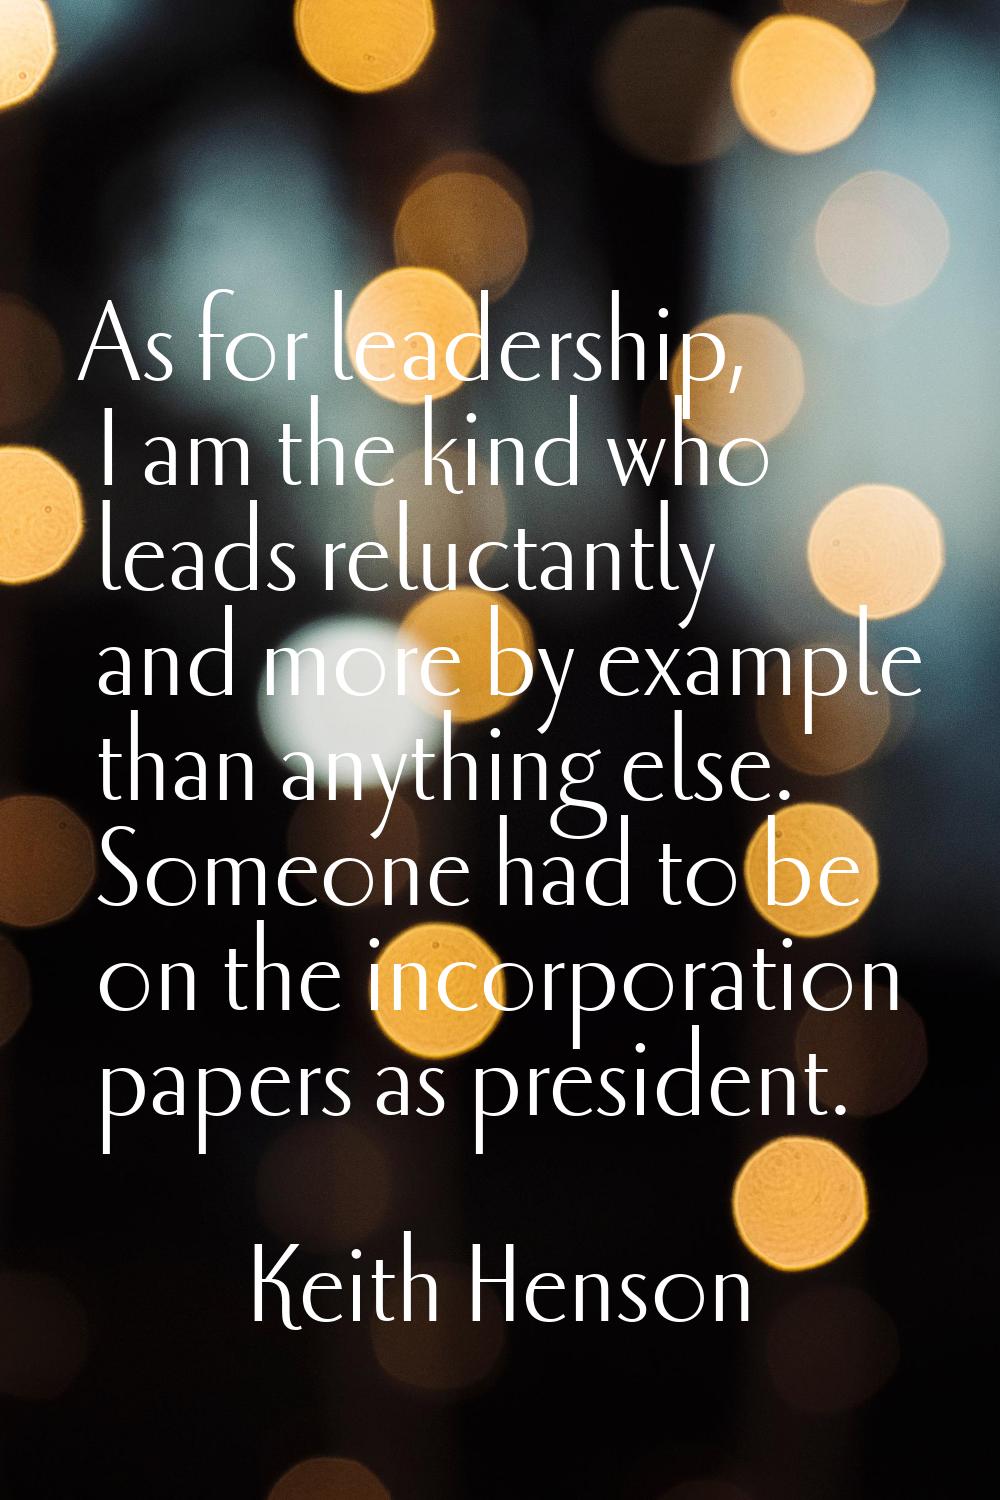 As for leadership, I am the kind who leads reluctantly and more by example than anything else. Some